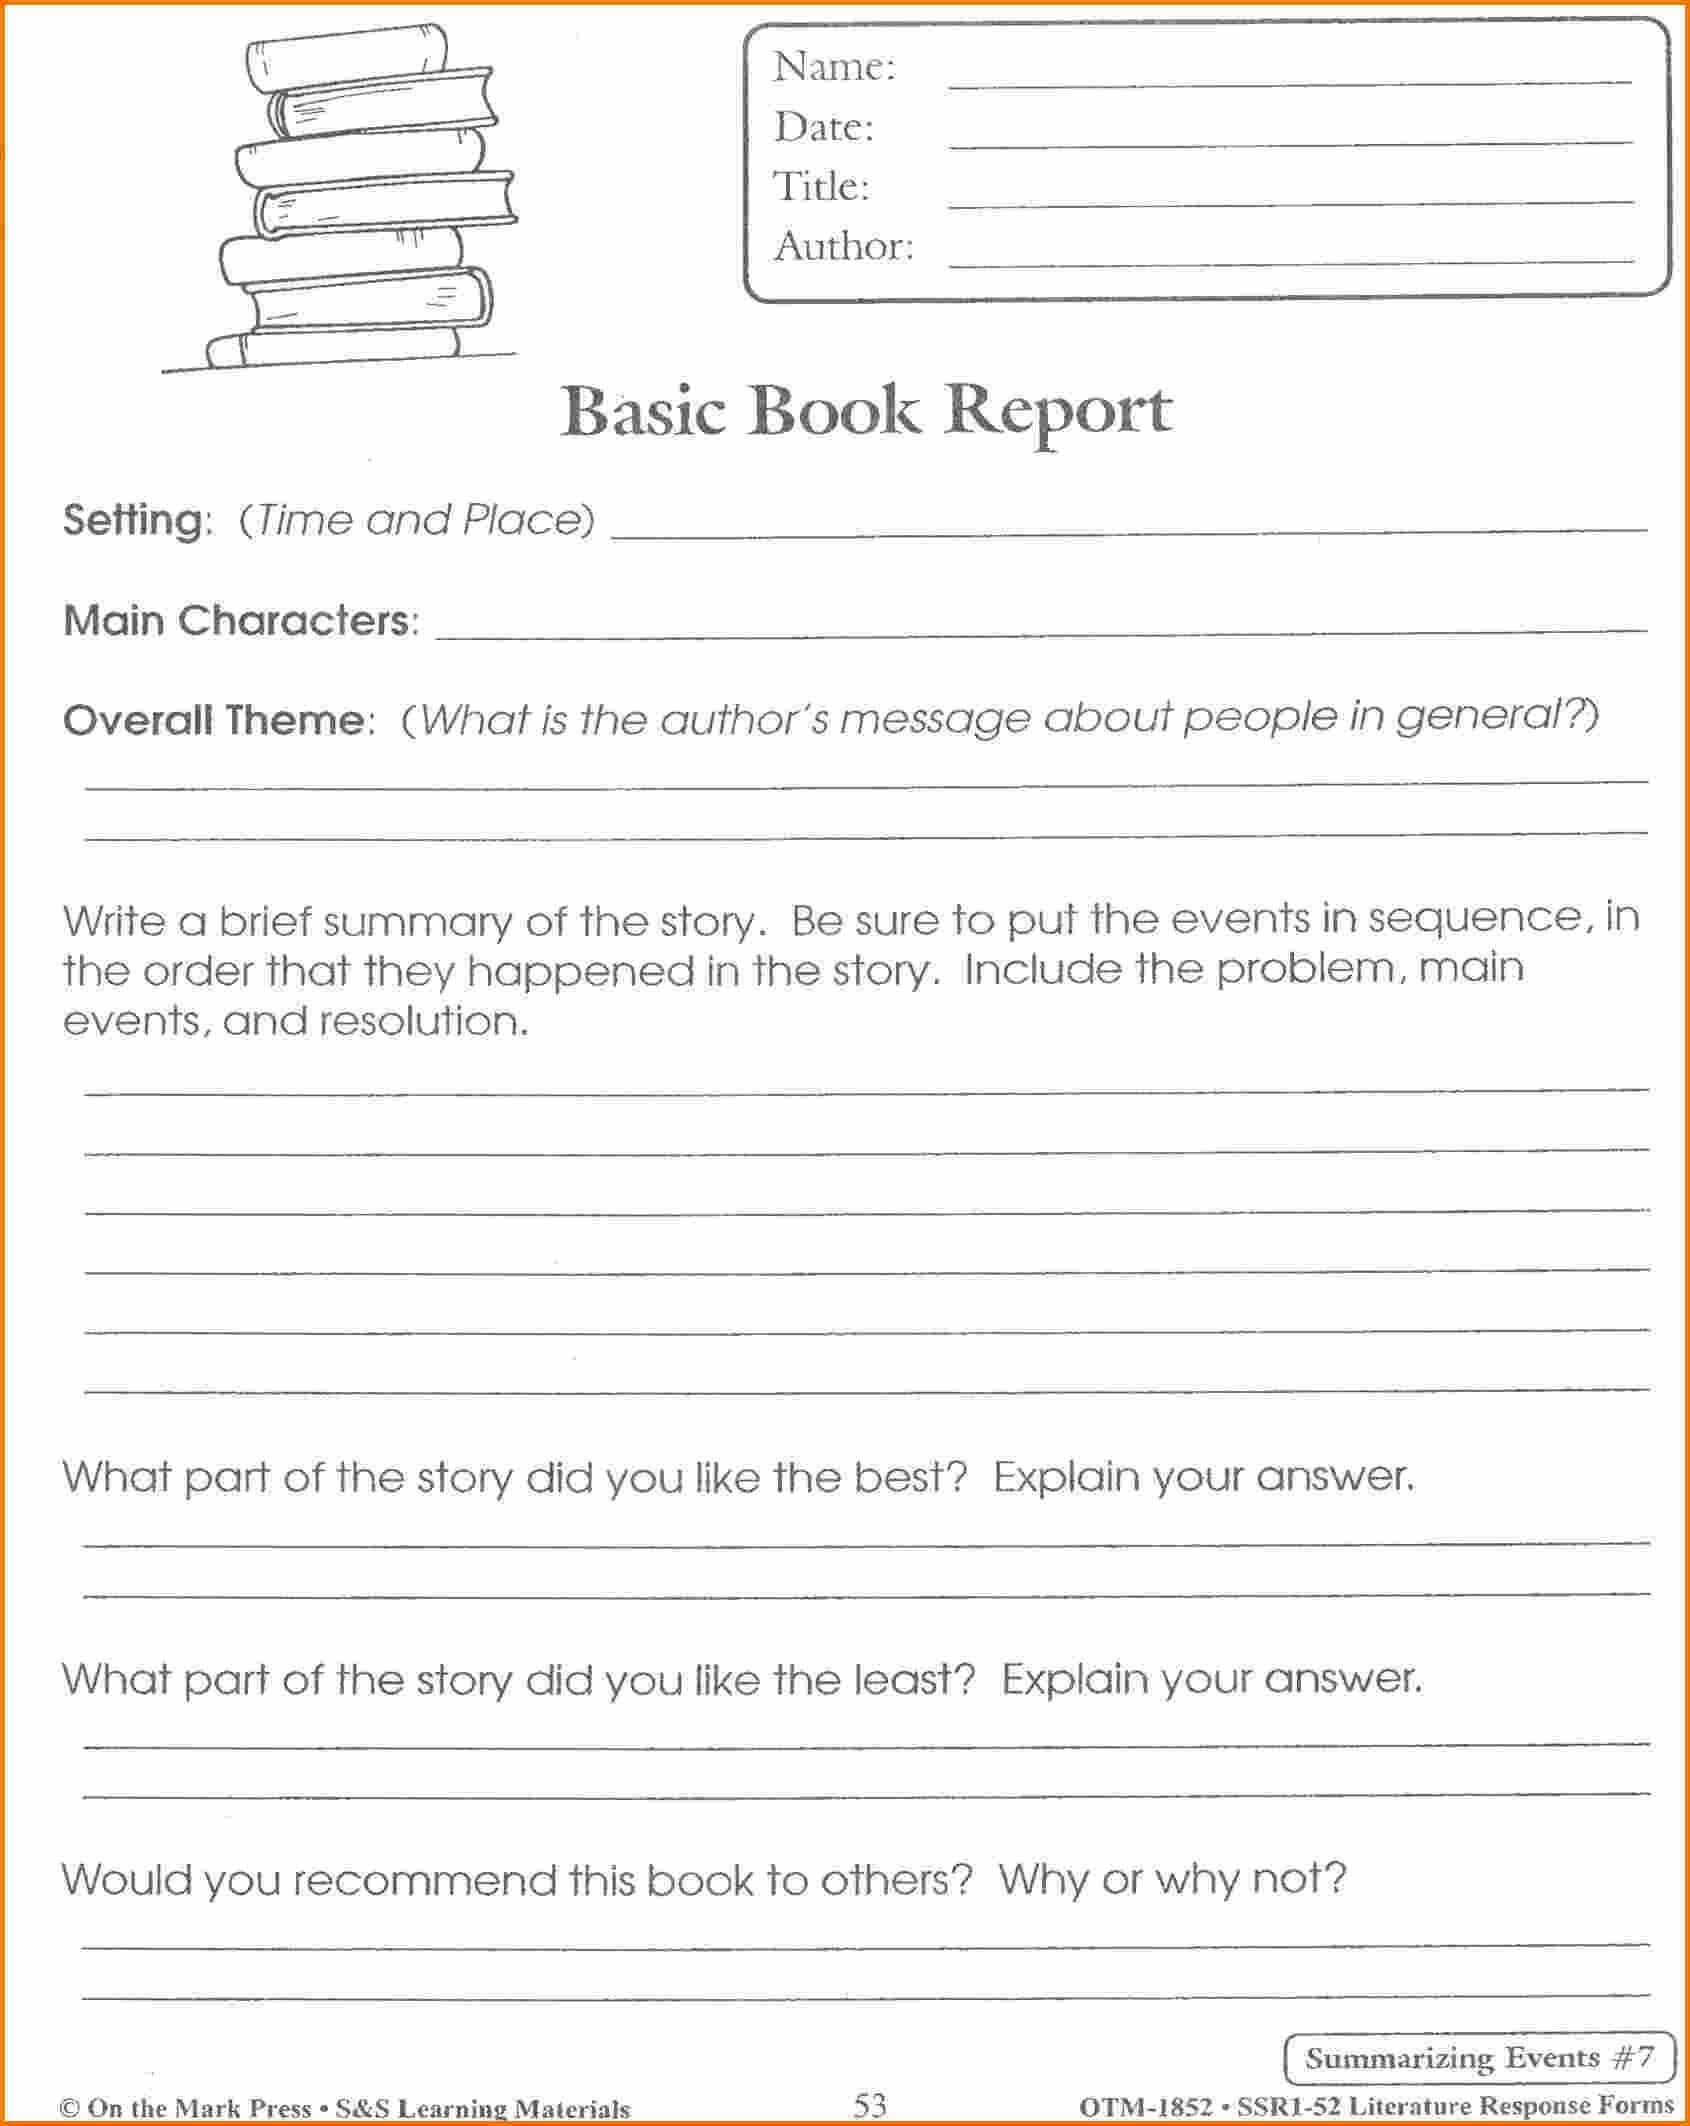 Pinmarcus Tong On Book | Book Report Templates, Book Regarding Book Report Template 4Th Grade